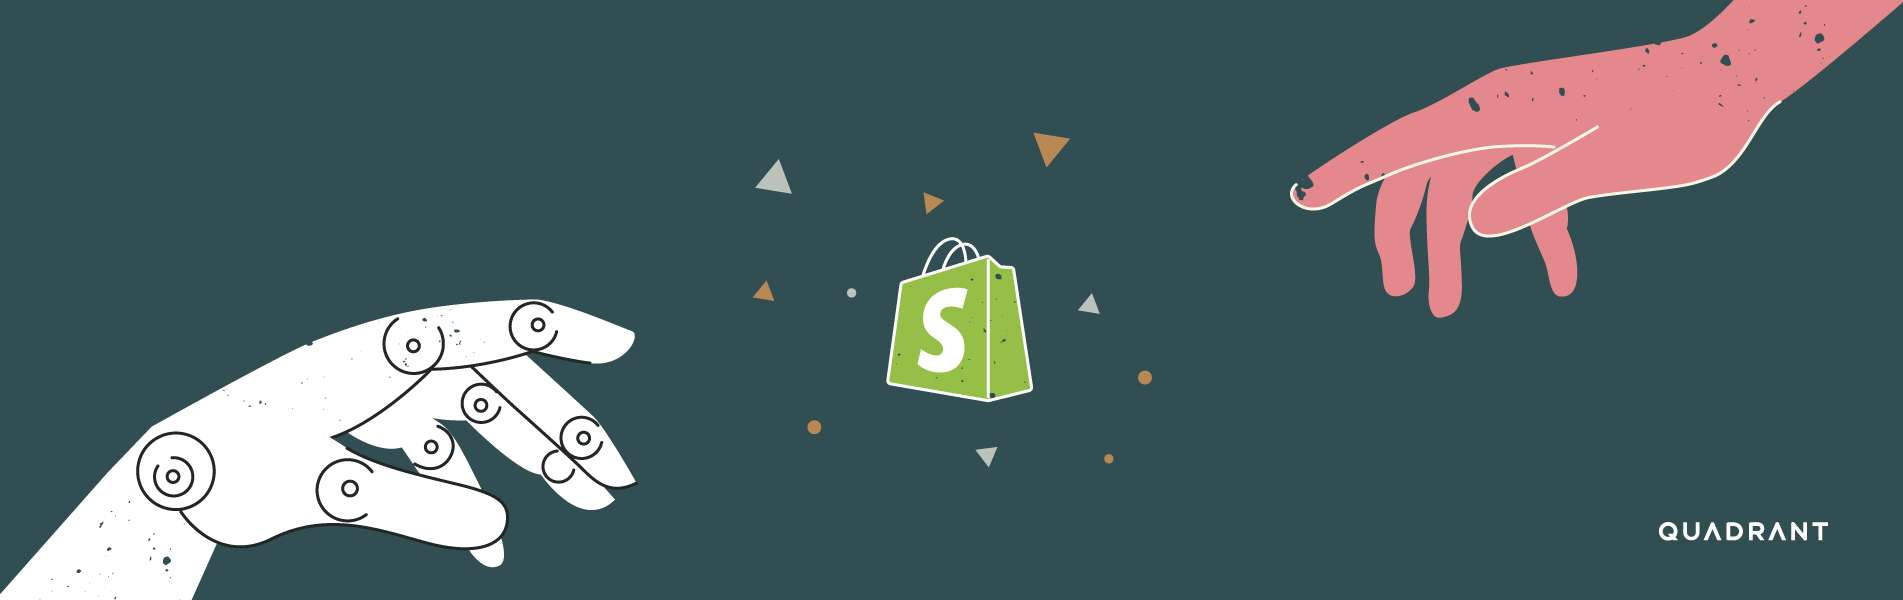 Shopify AI tools for marketing, customer service and inventory